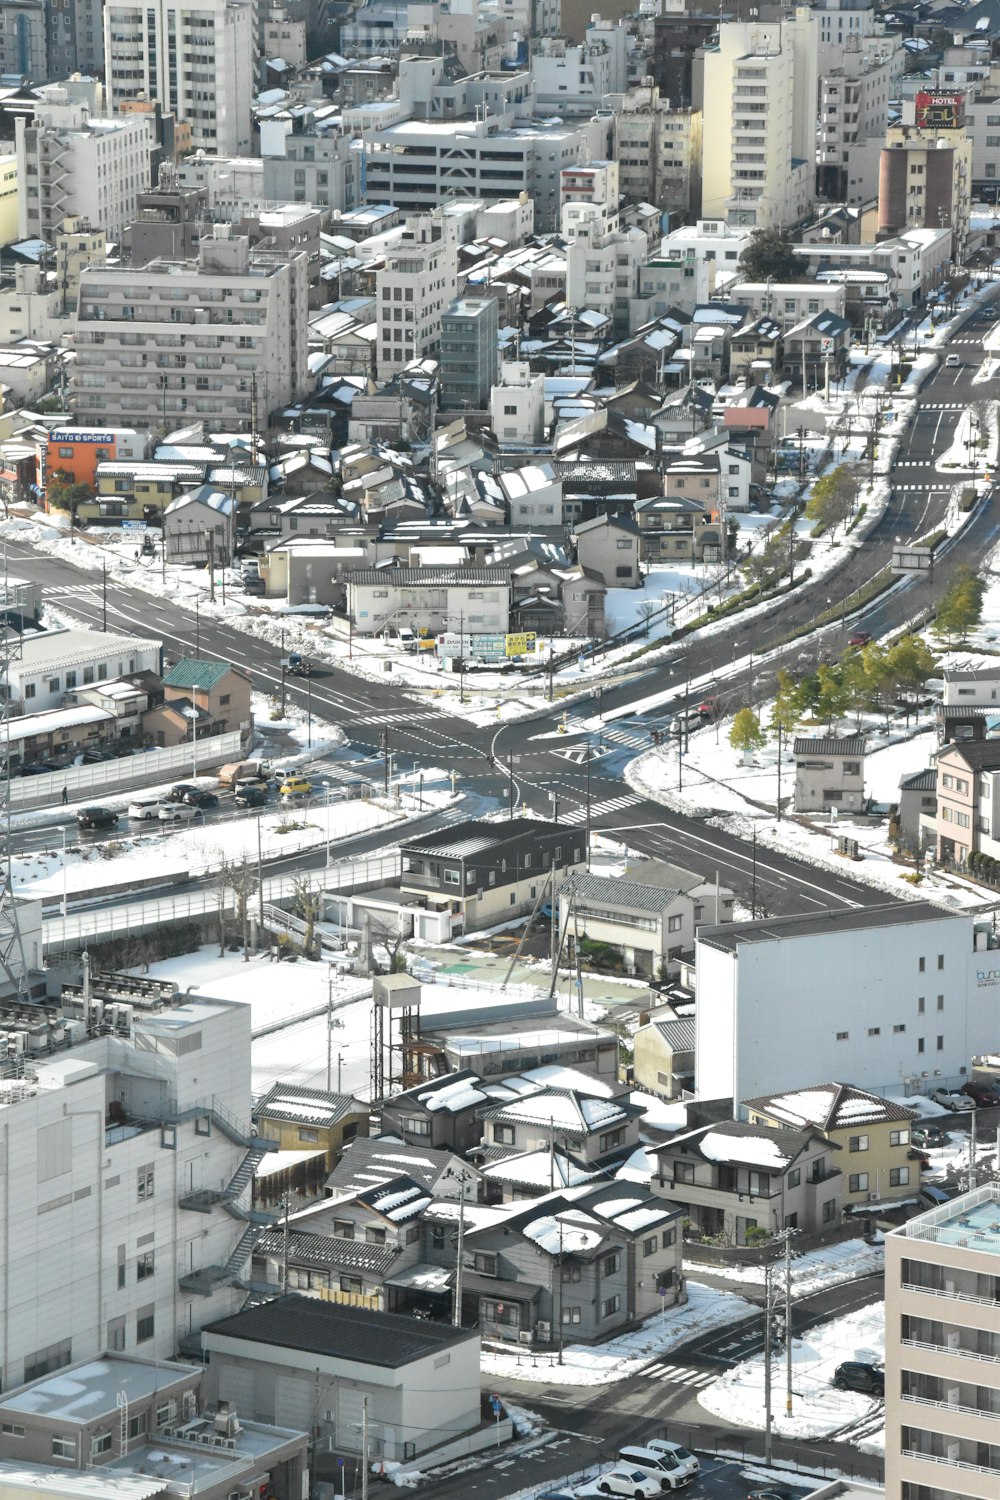 a view of a city with a train on the tracks